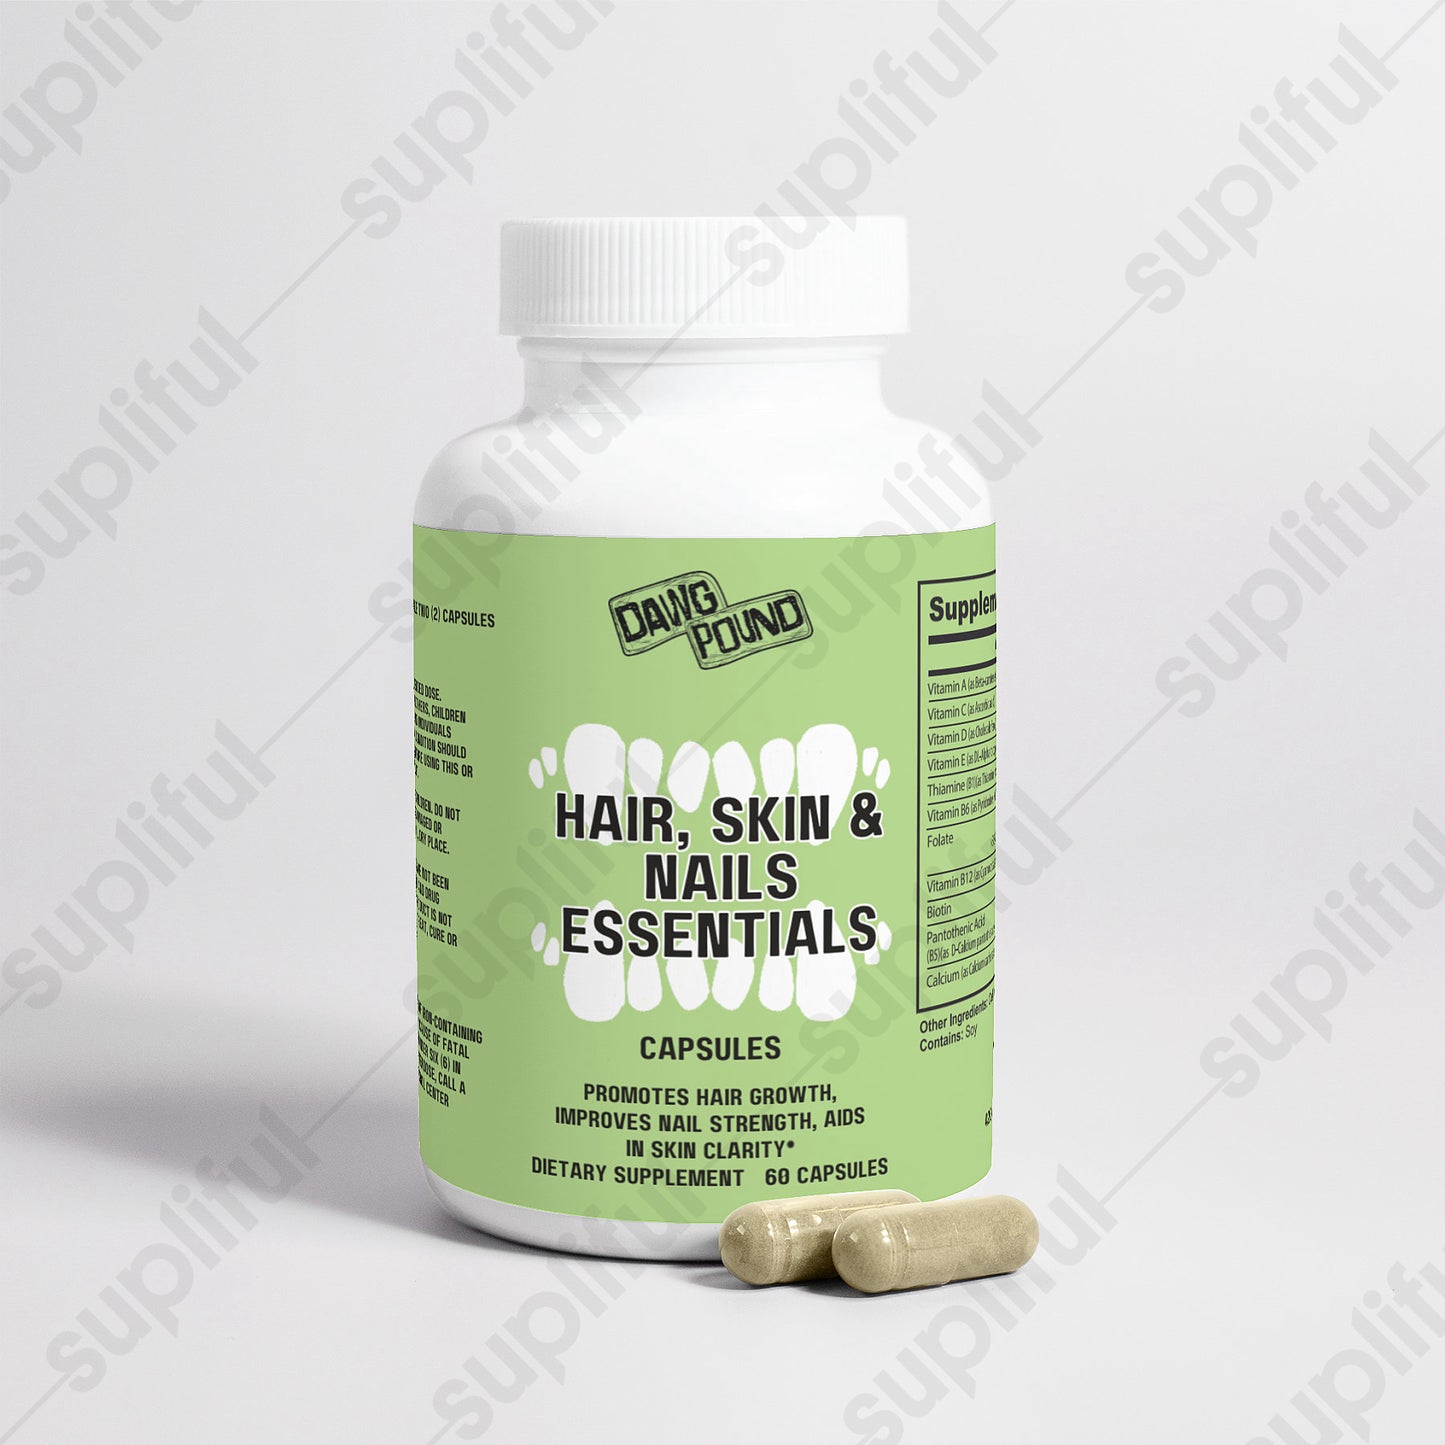 Dawg Pound Hair, Skin & Nails Essentials Supplement Capsules - Front View With Capsules in Front